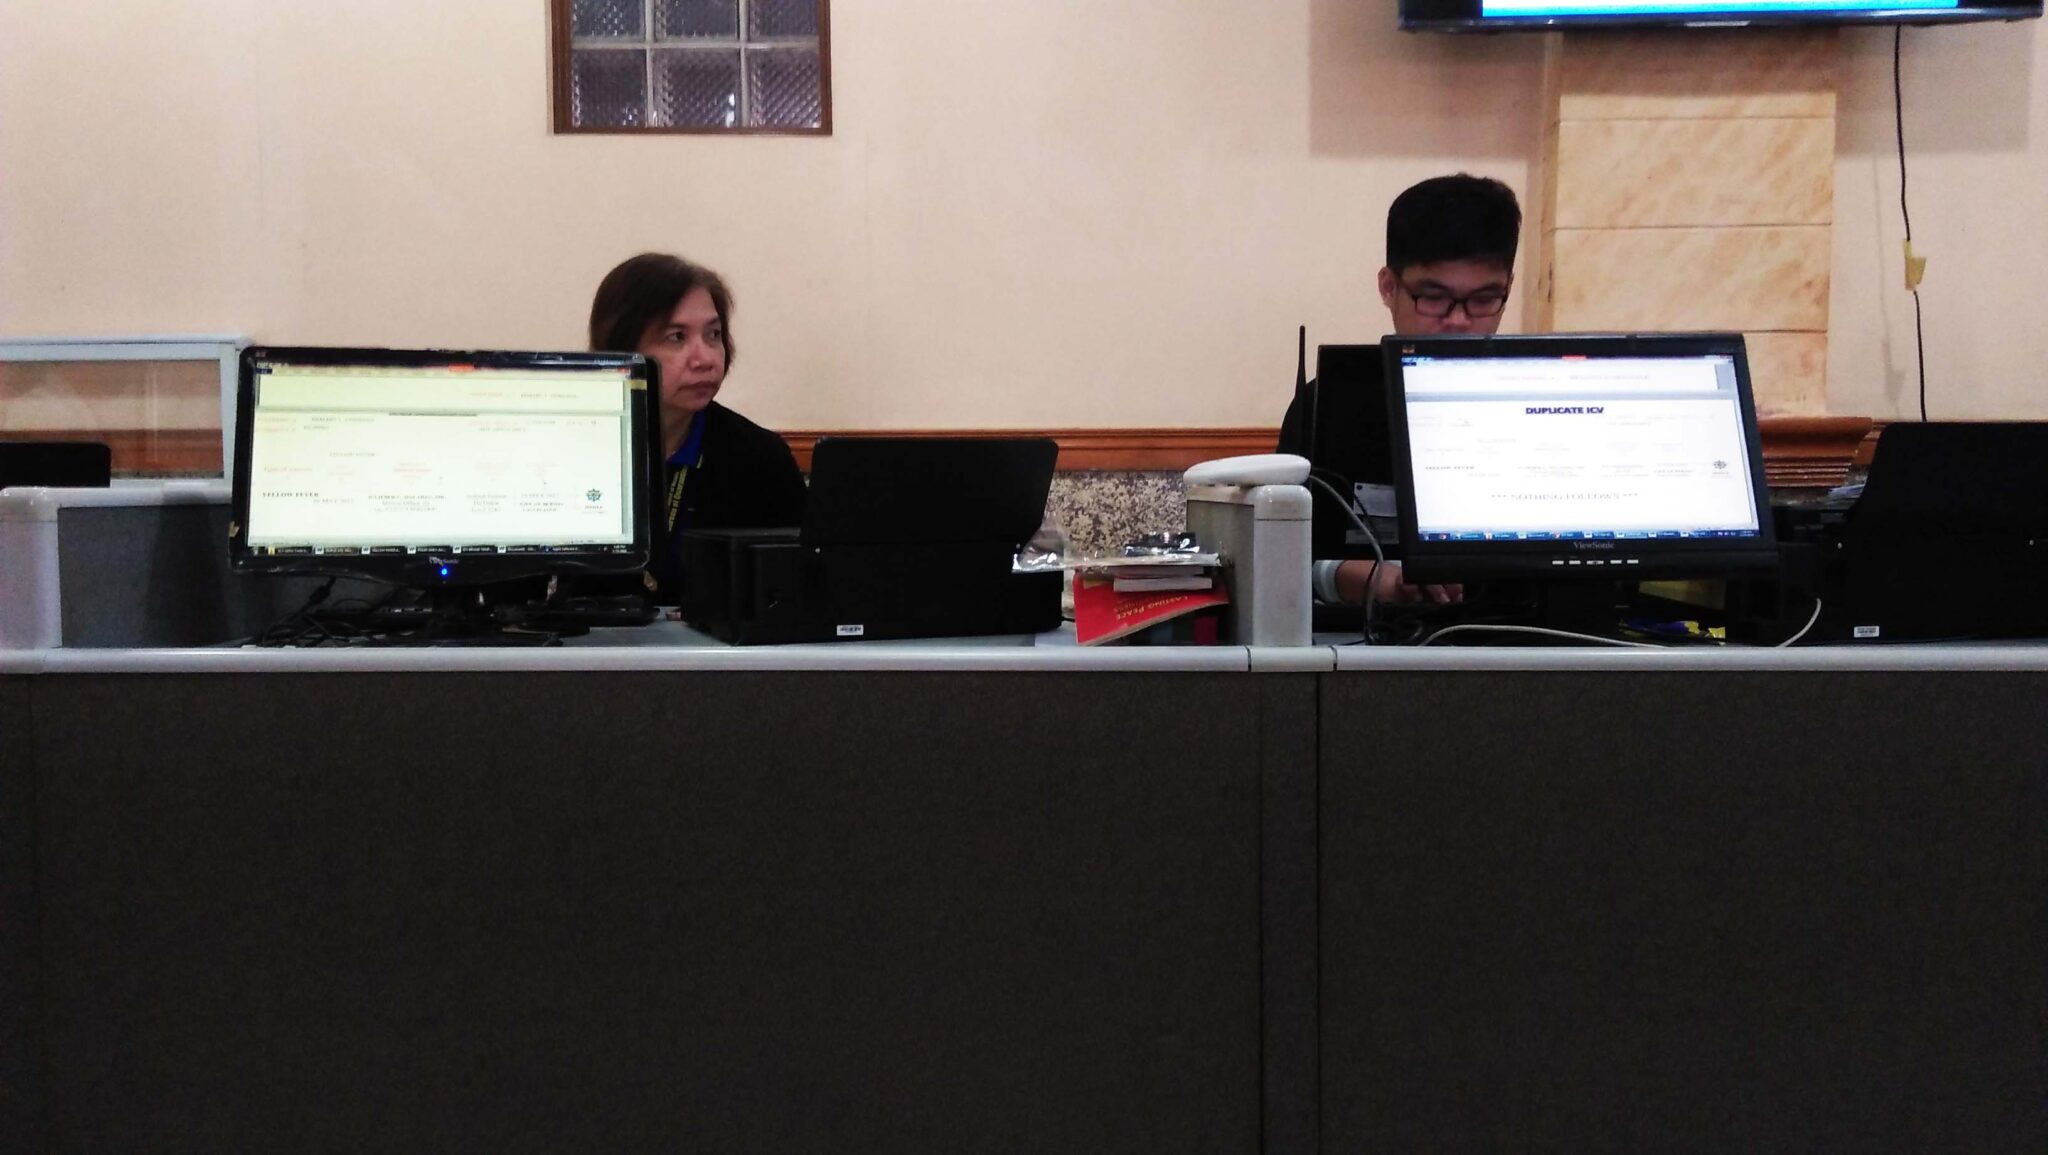 Two staffs with their computers working in the Biometrics Section.